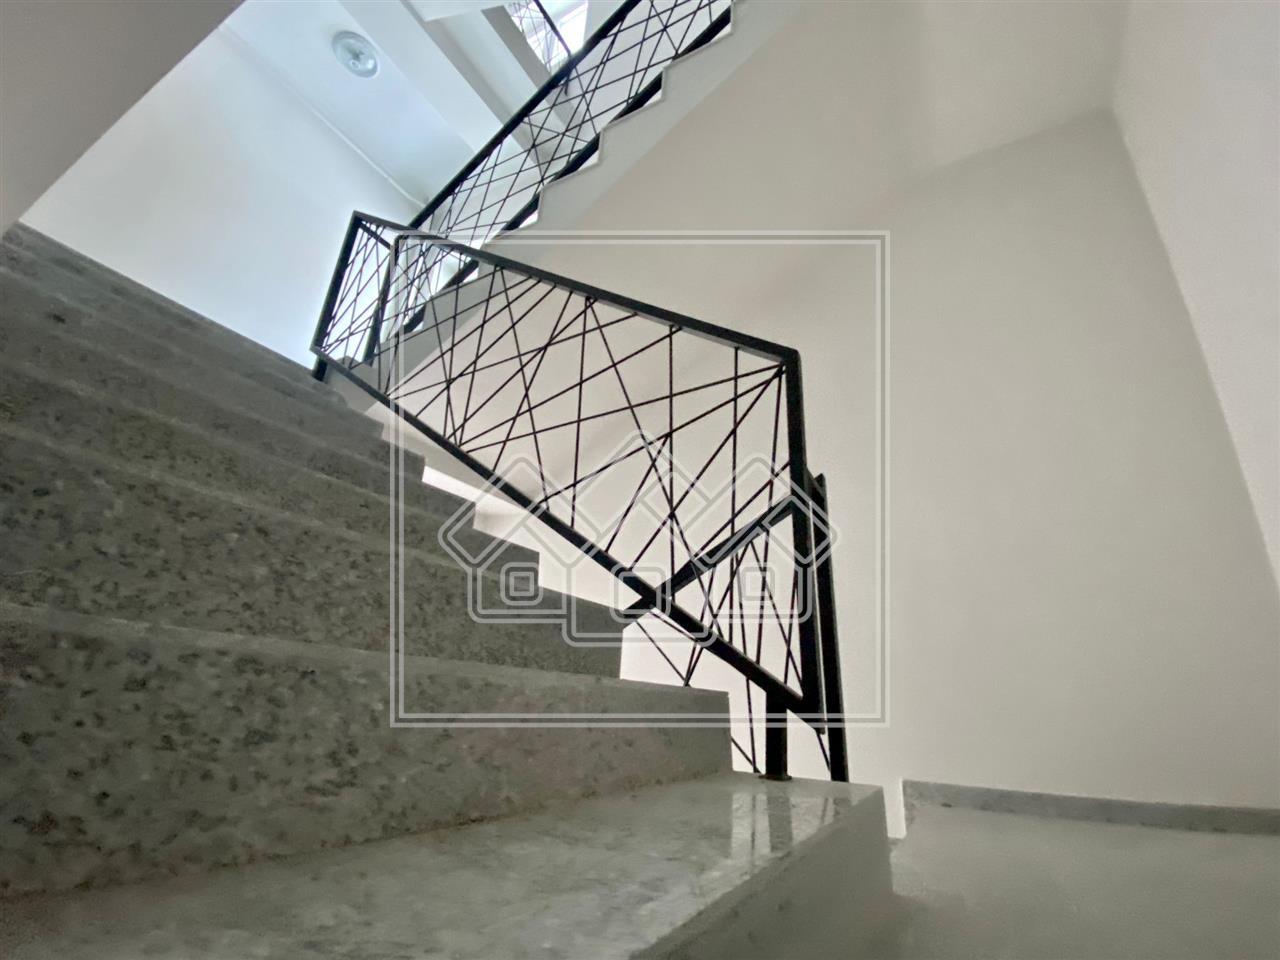 Penthouse on 2 levels - special concept, 128.54 useful sqm (R)